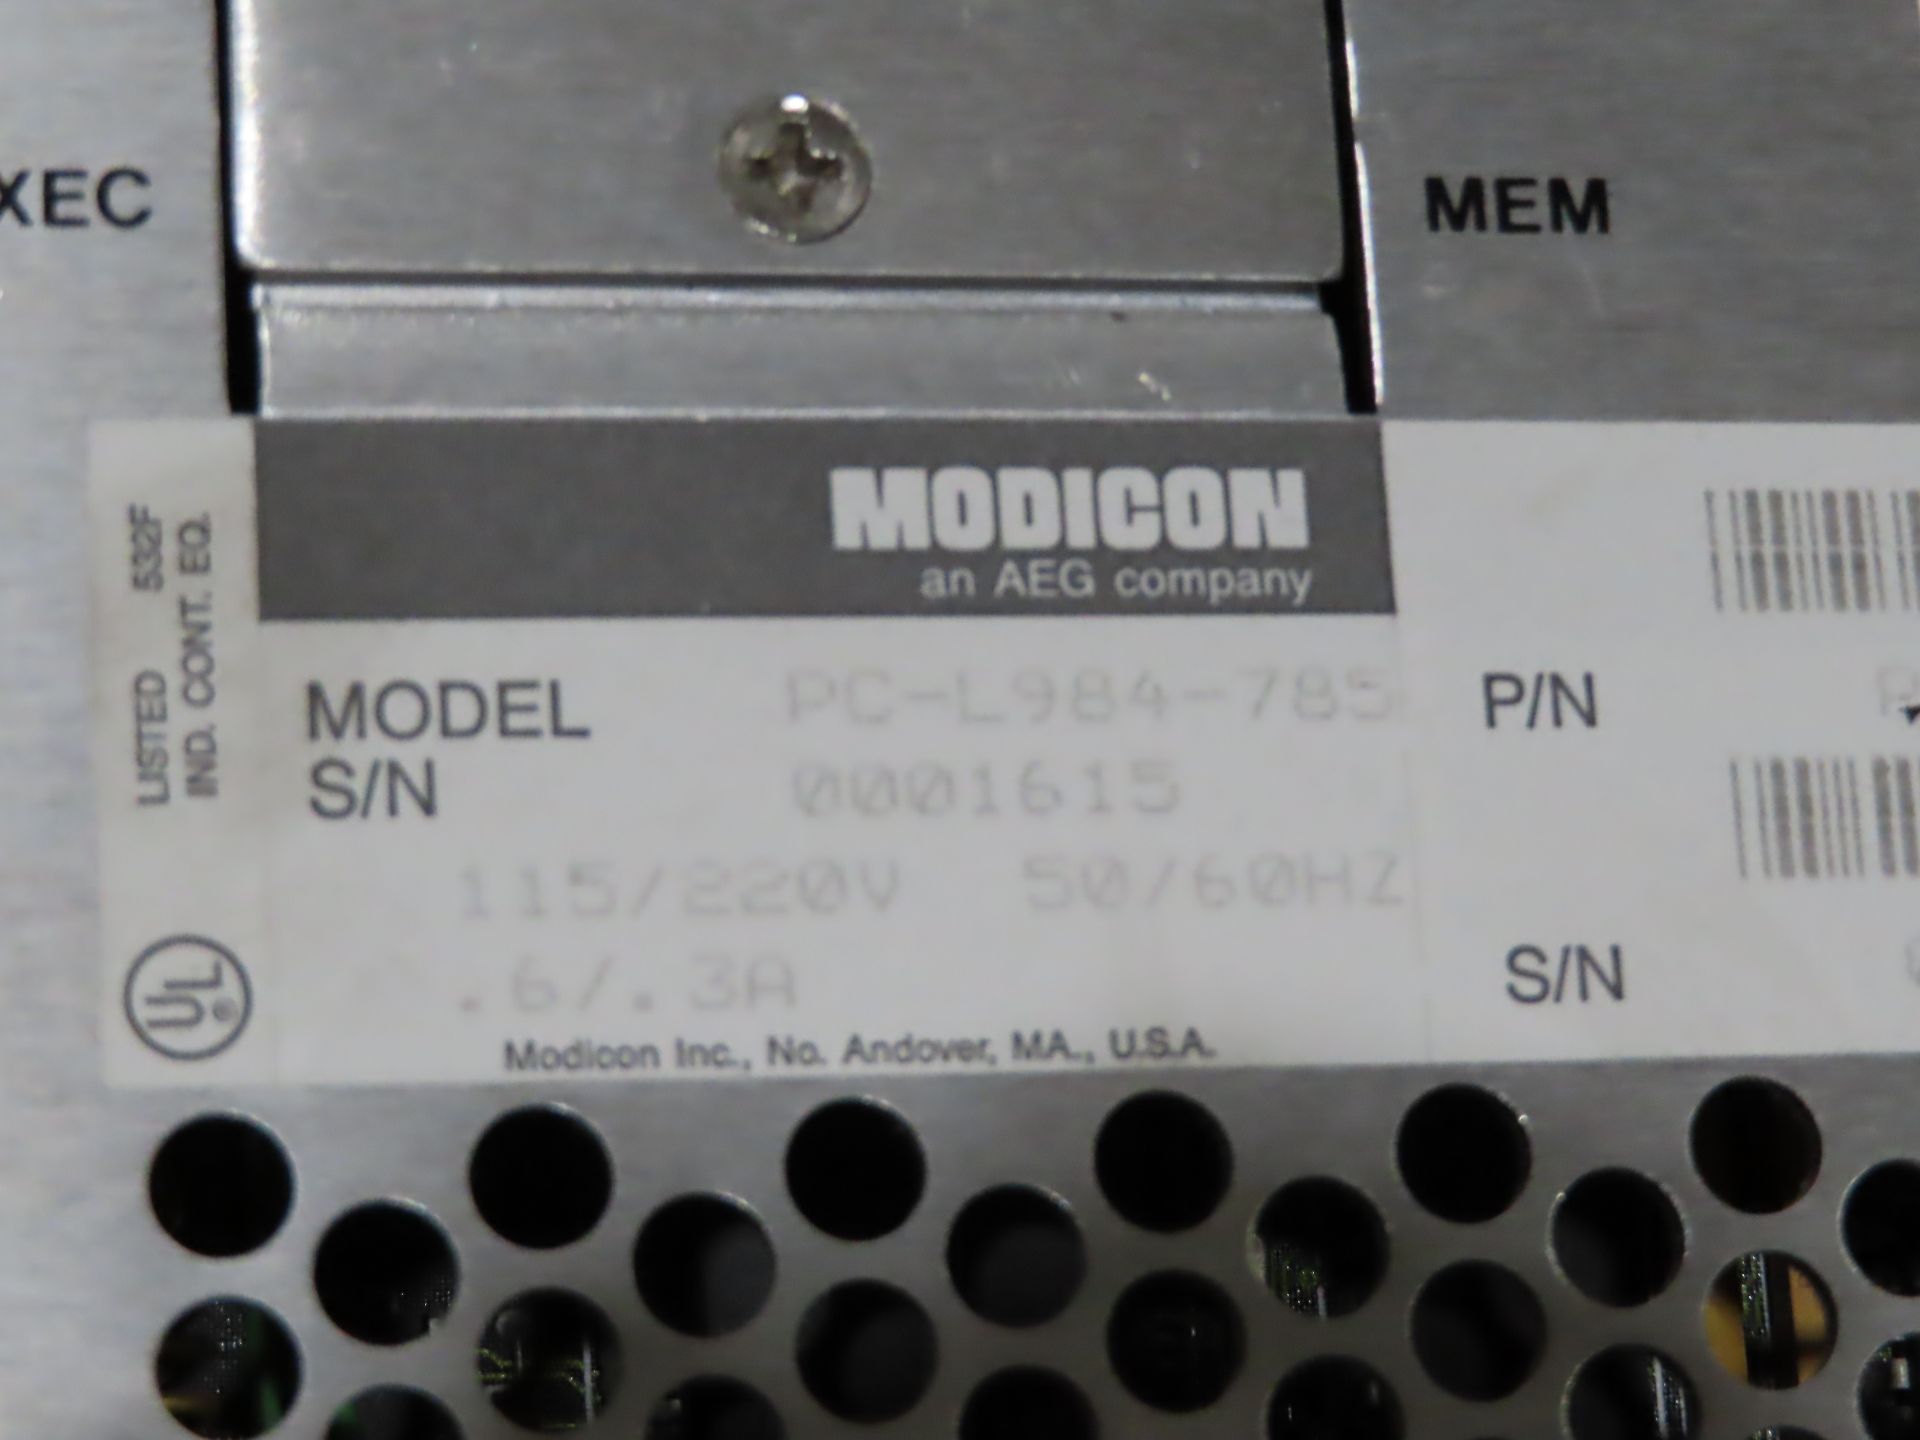 AEG modicon model PC-L984-785, as always, with Brolyn LLC auctions, all lots can be picked up from - Image 2 of 2